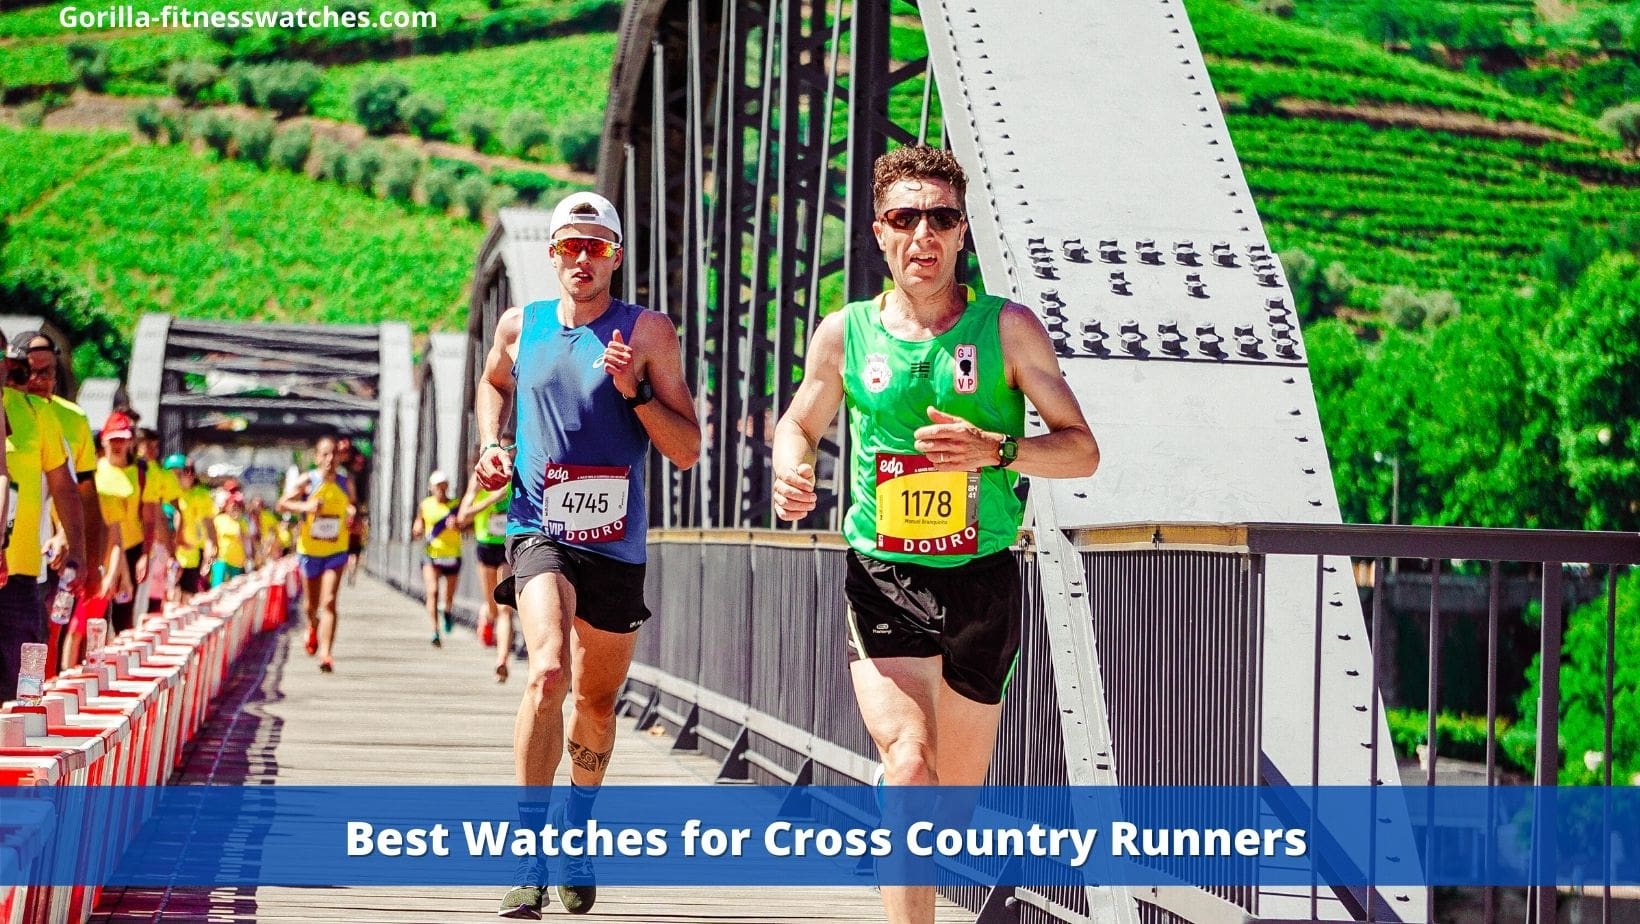 Best Watches for Cross Country Runners